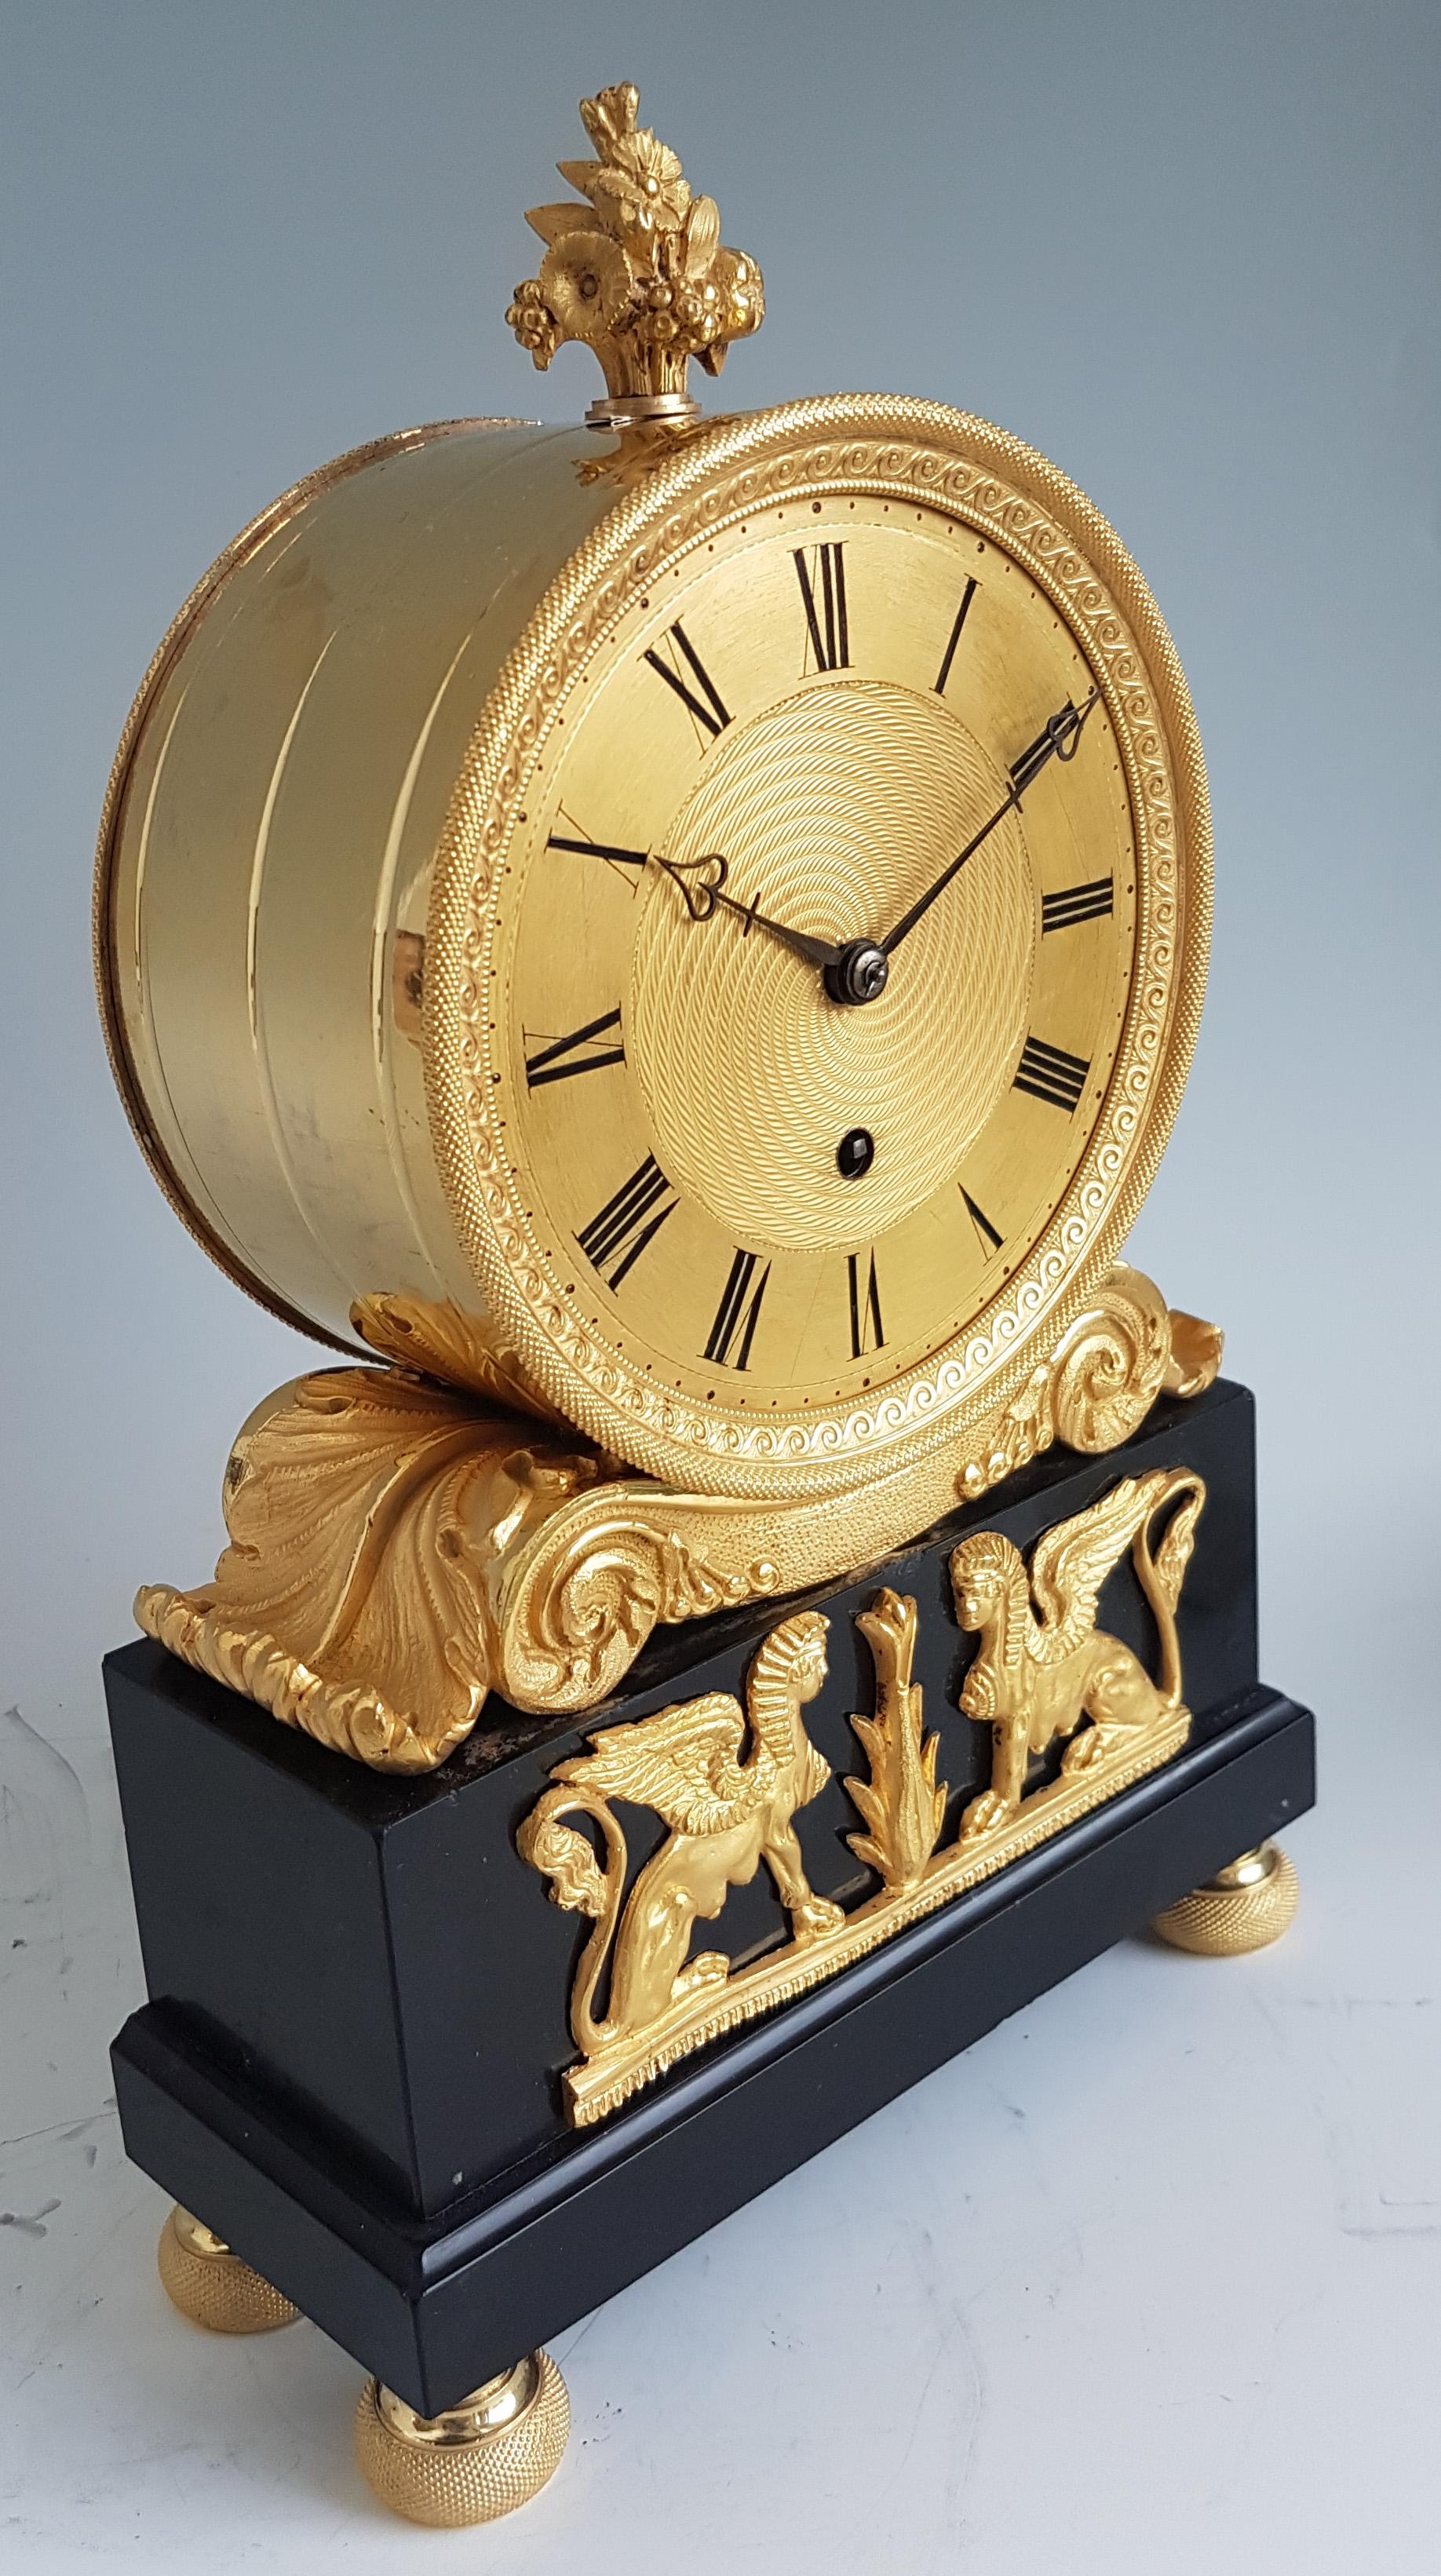 A very fine antique English Regency ormolu and black marble mantel timepiece with eight day movement. The superb circular ormolu dial with engine turned decoration with swirling decoration to the centre, roman numerals and blued steel heart shaped